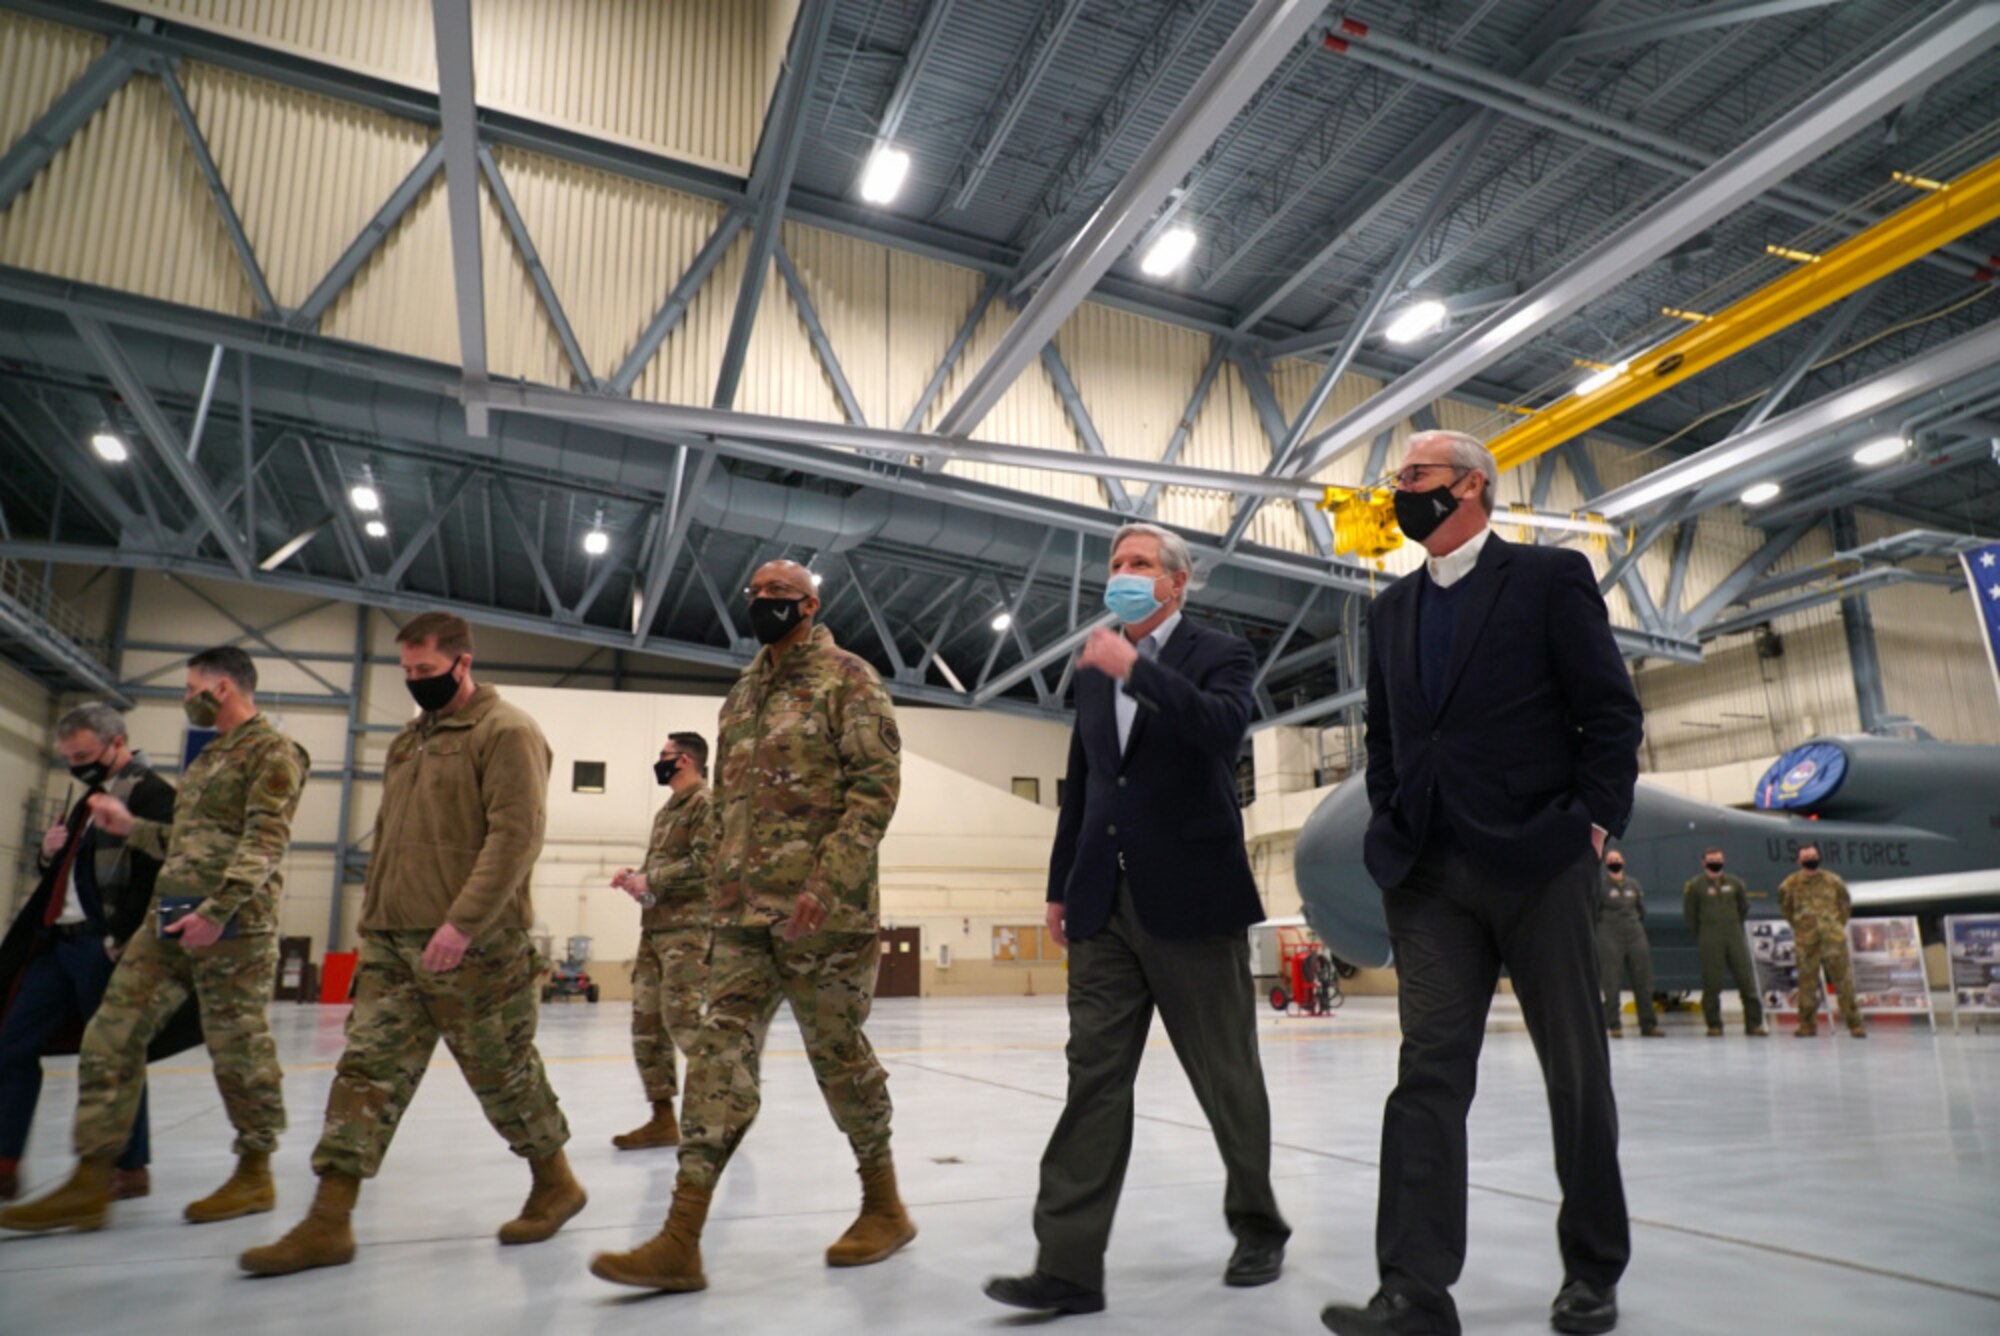 Col. Cameron Pringle, 319th Reconnaissance Wing commander, (third from left), Air Force Chief of Staff Gen. Charles Q. Brown, Jr., Sen. John Hoeven and Senator Kevin Cramer, depart an aircraft hangar at Grand Forks Air Force Base, N.D., Feb. 17, 2021. Brown received a brief from members of the 319th Aircraft Maintenance Squadron, who shared information regarding the critical role the RQ-4 Global Hawk plays in the Air Force’s intelligence, surveillance and reconnaissance mission. (U.S. Air Force photo by Staff Sgt. Elora J. McCutcheon)